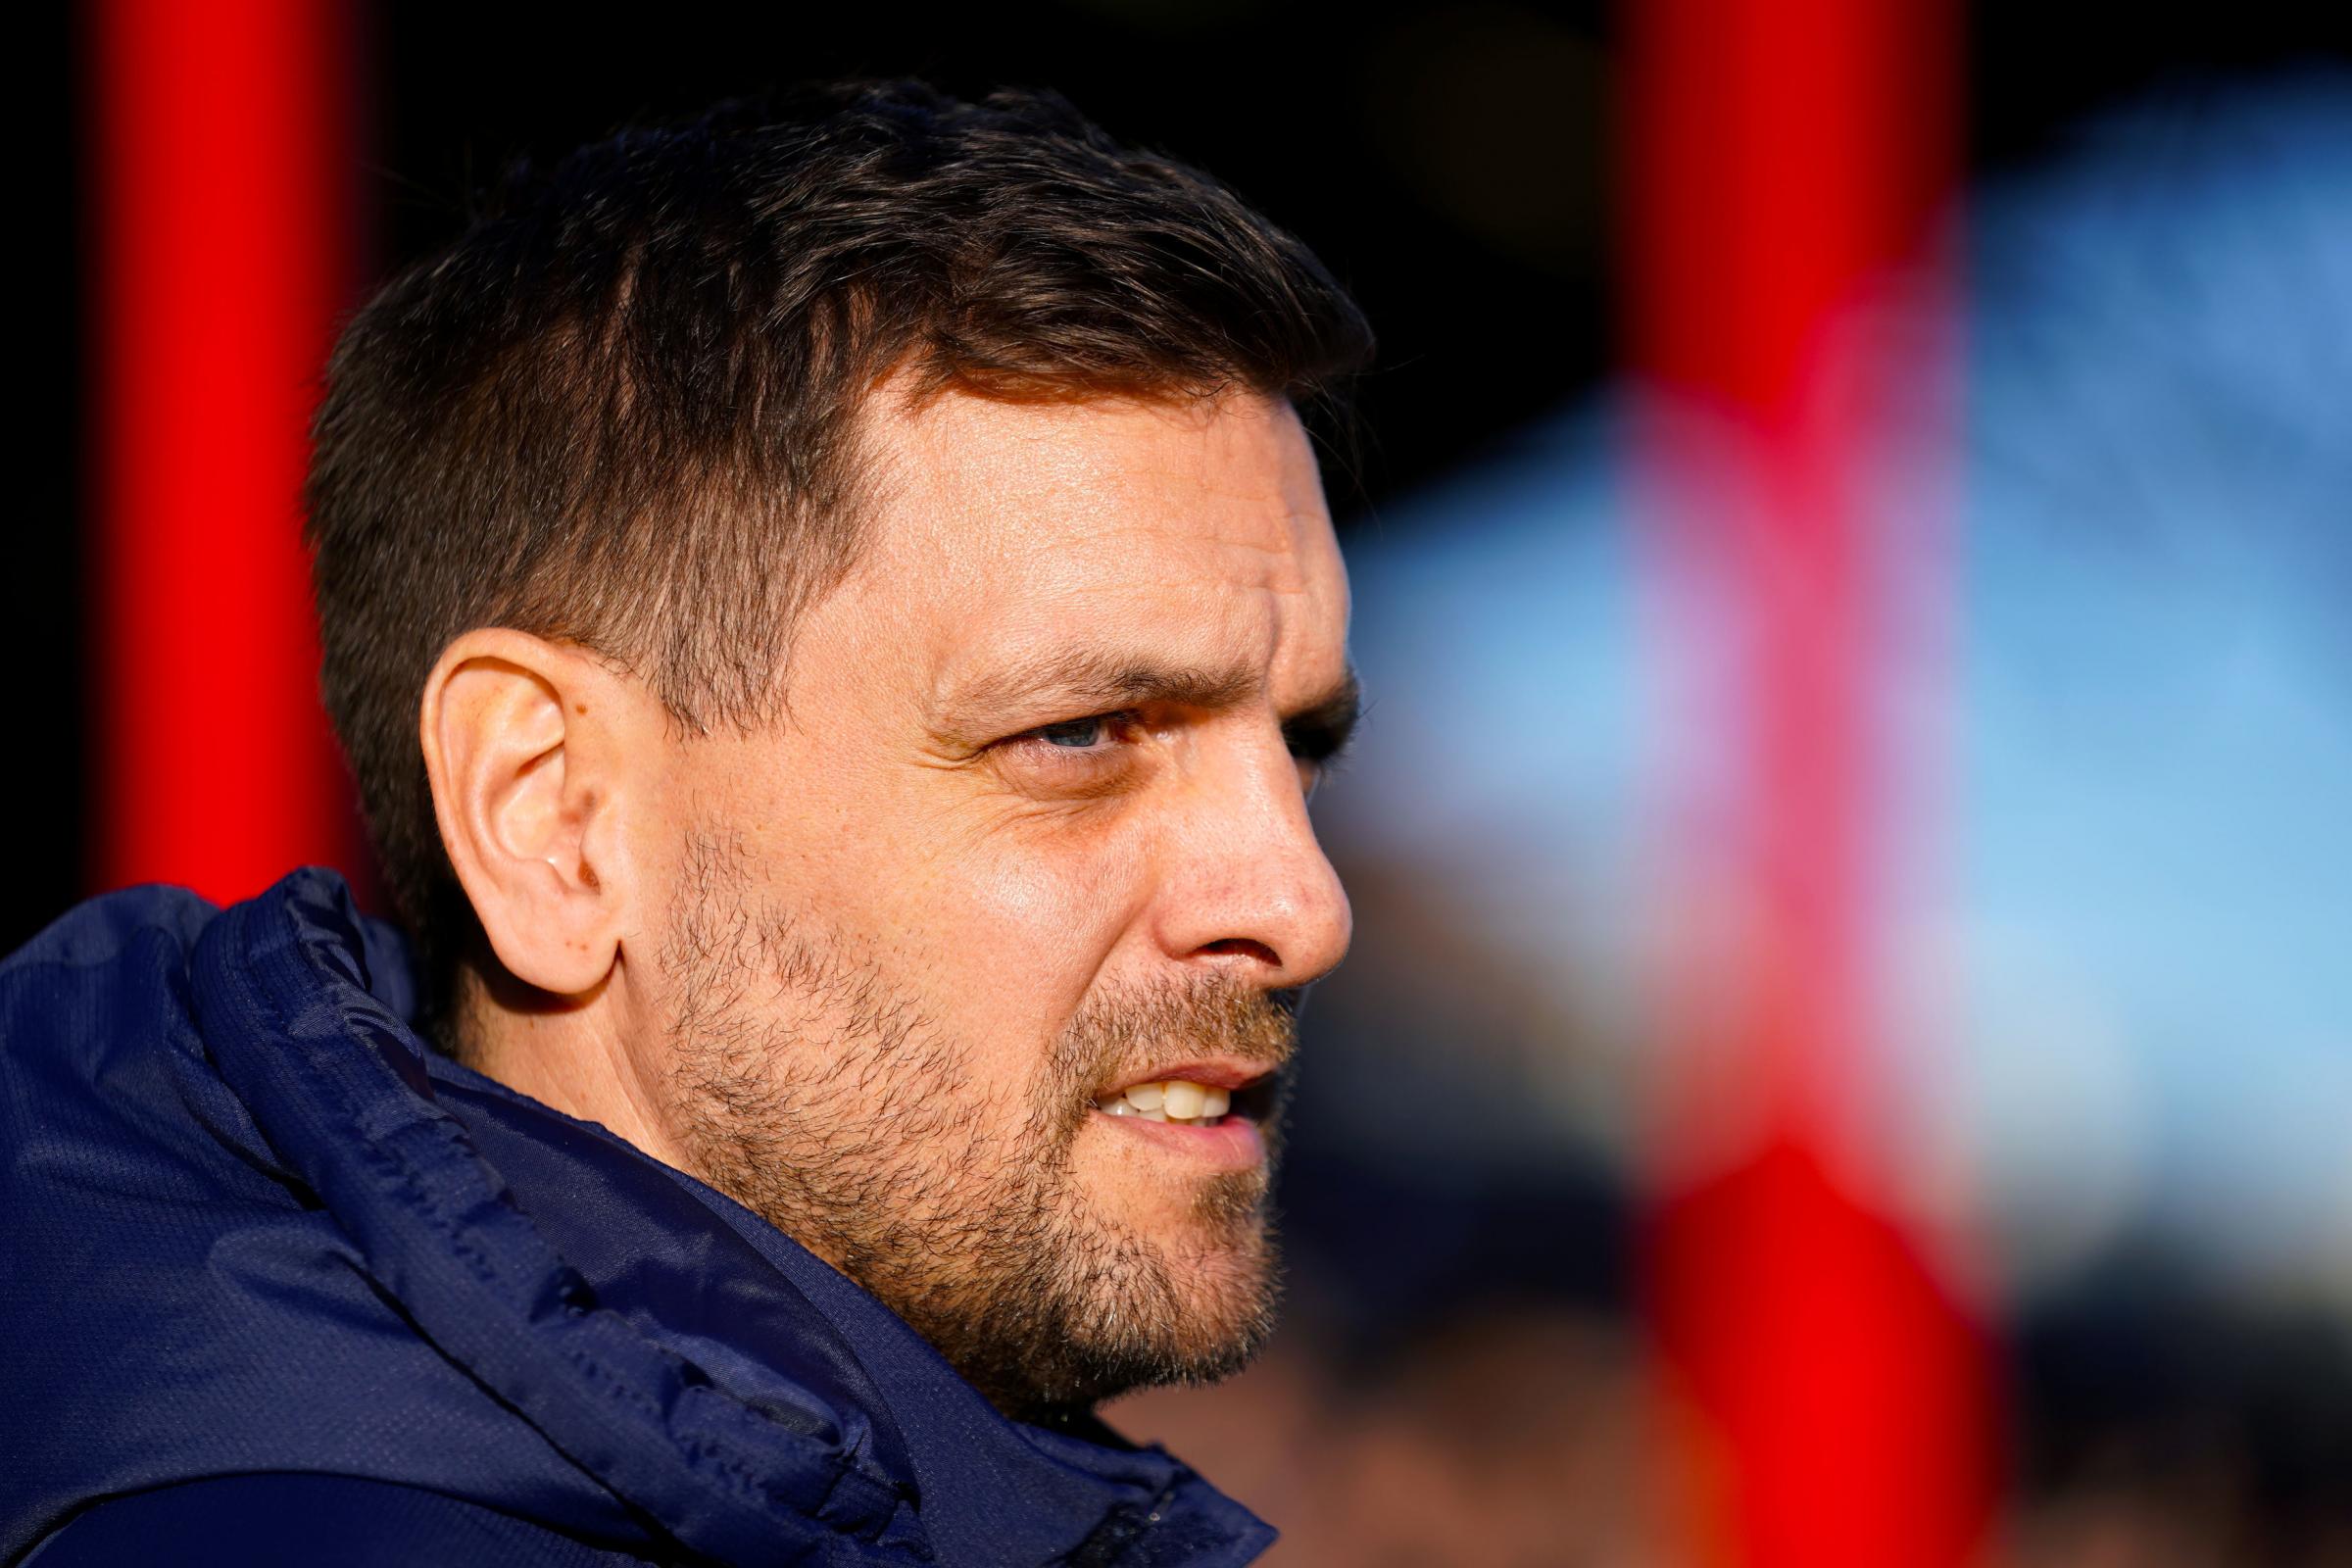 Woodgate 'has everything' to succeed in coaching, says his former boss